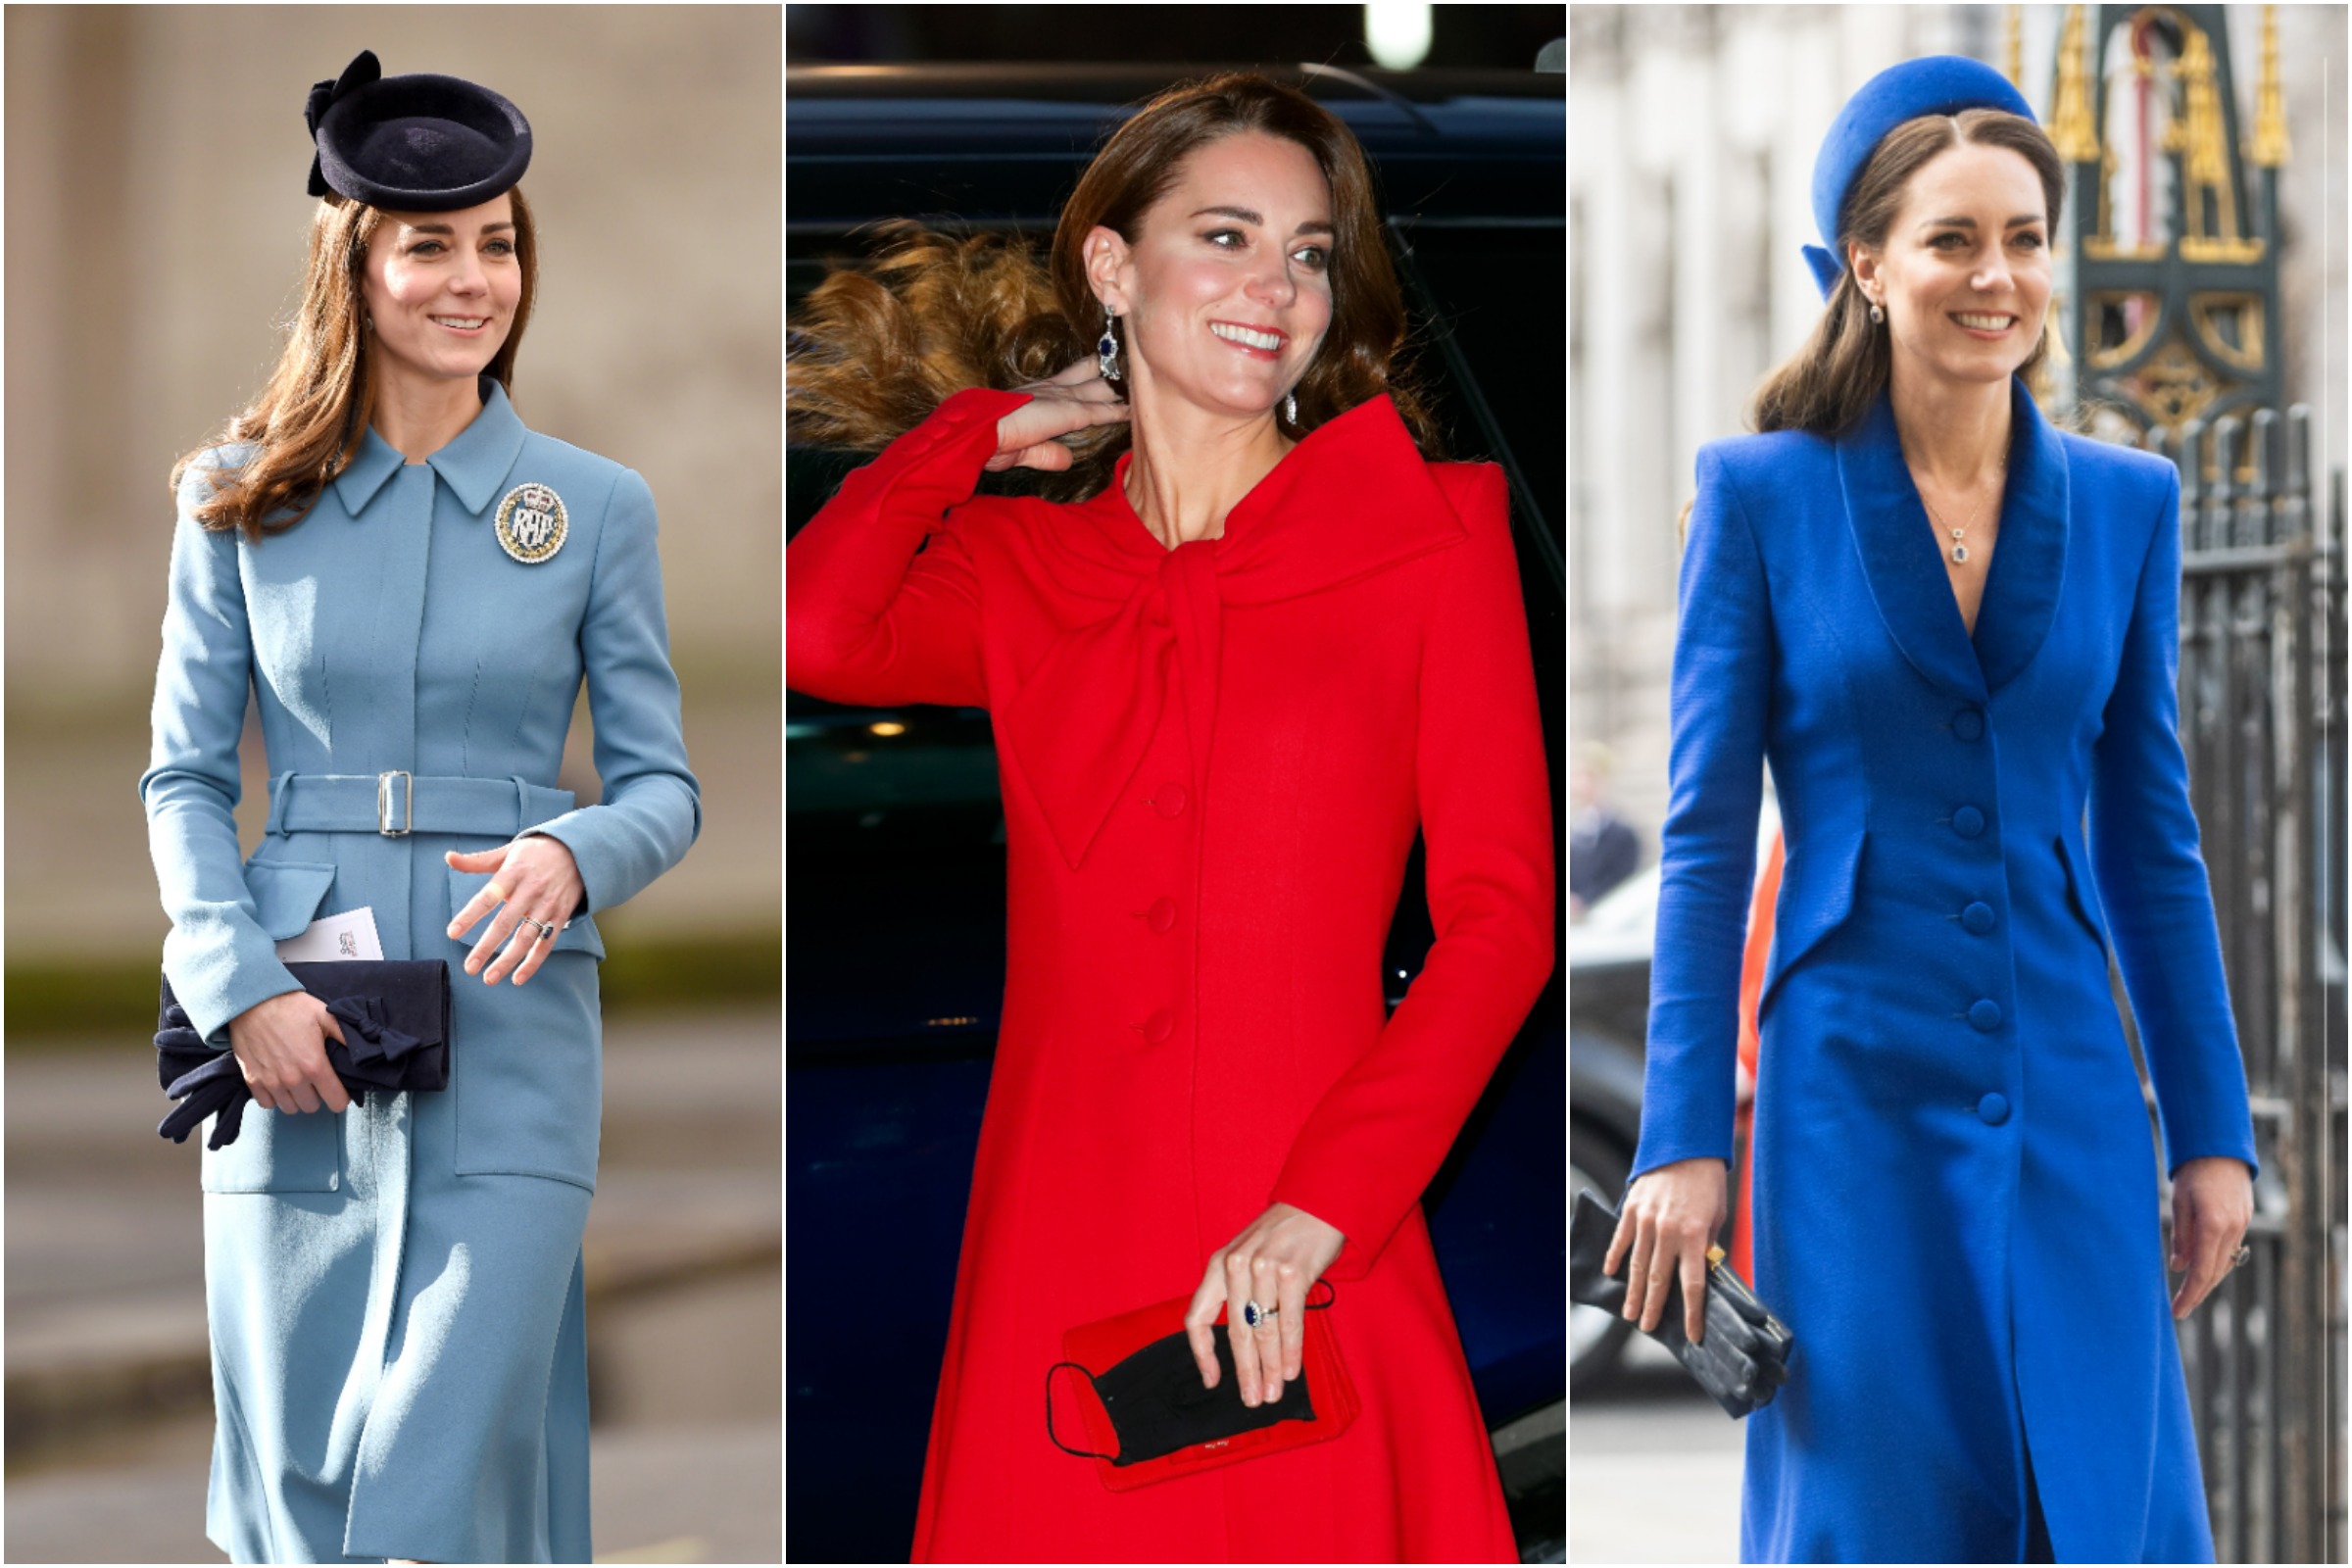 Kate Middleton Was All Business in a Pink Suit